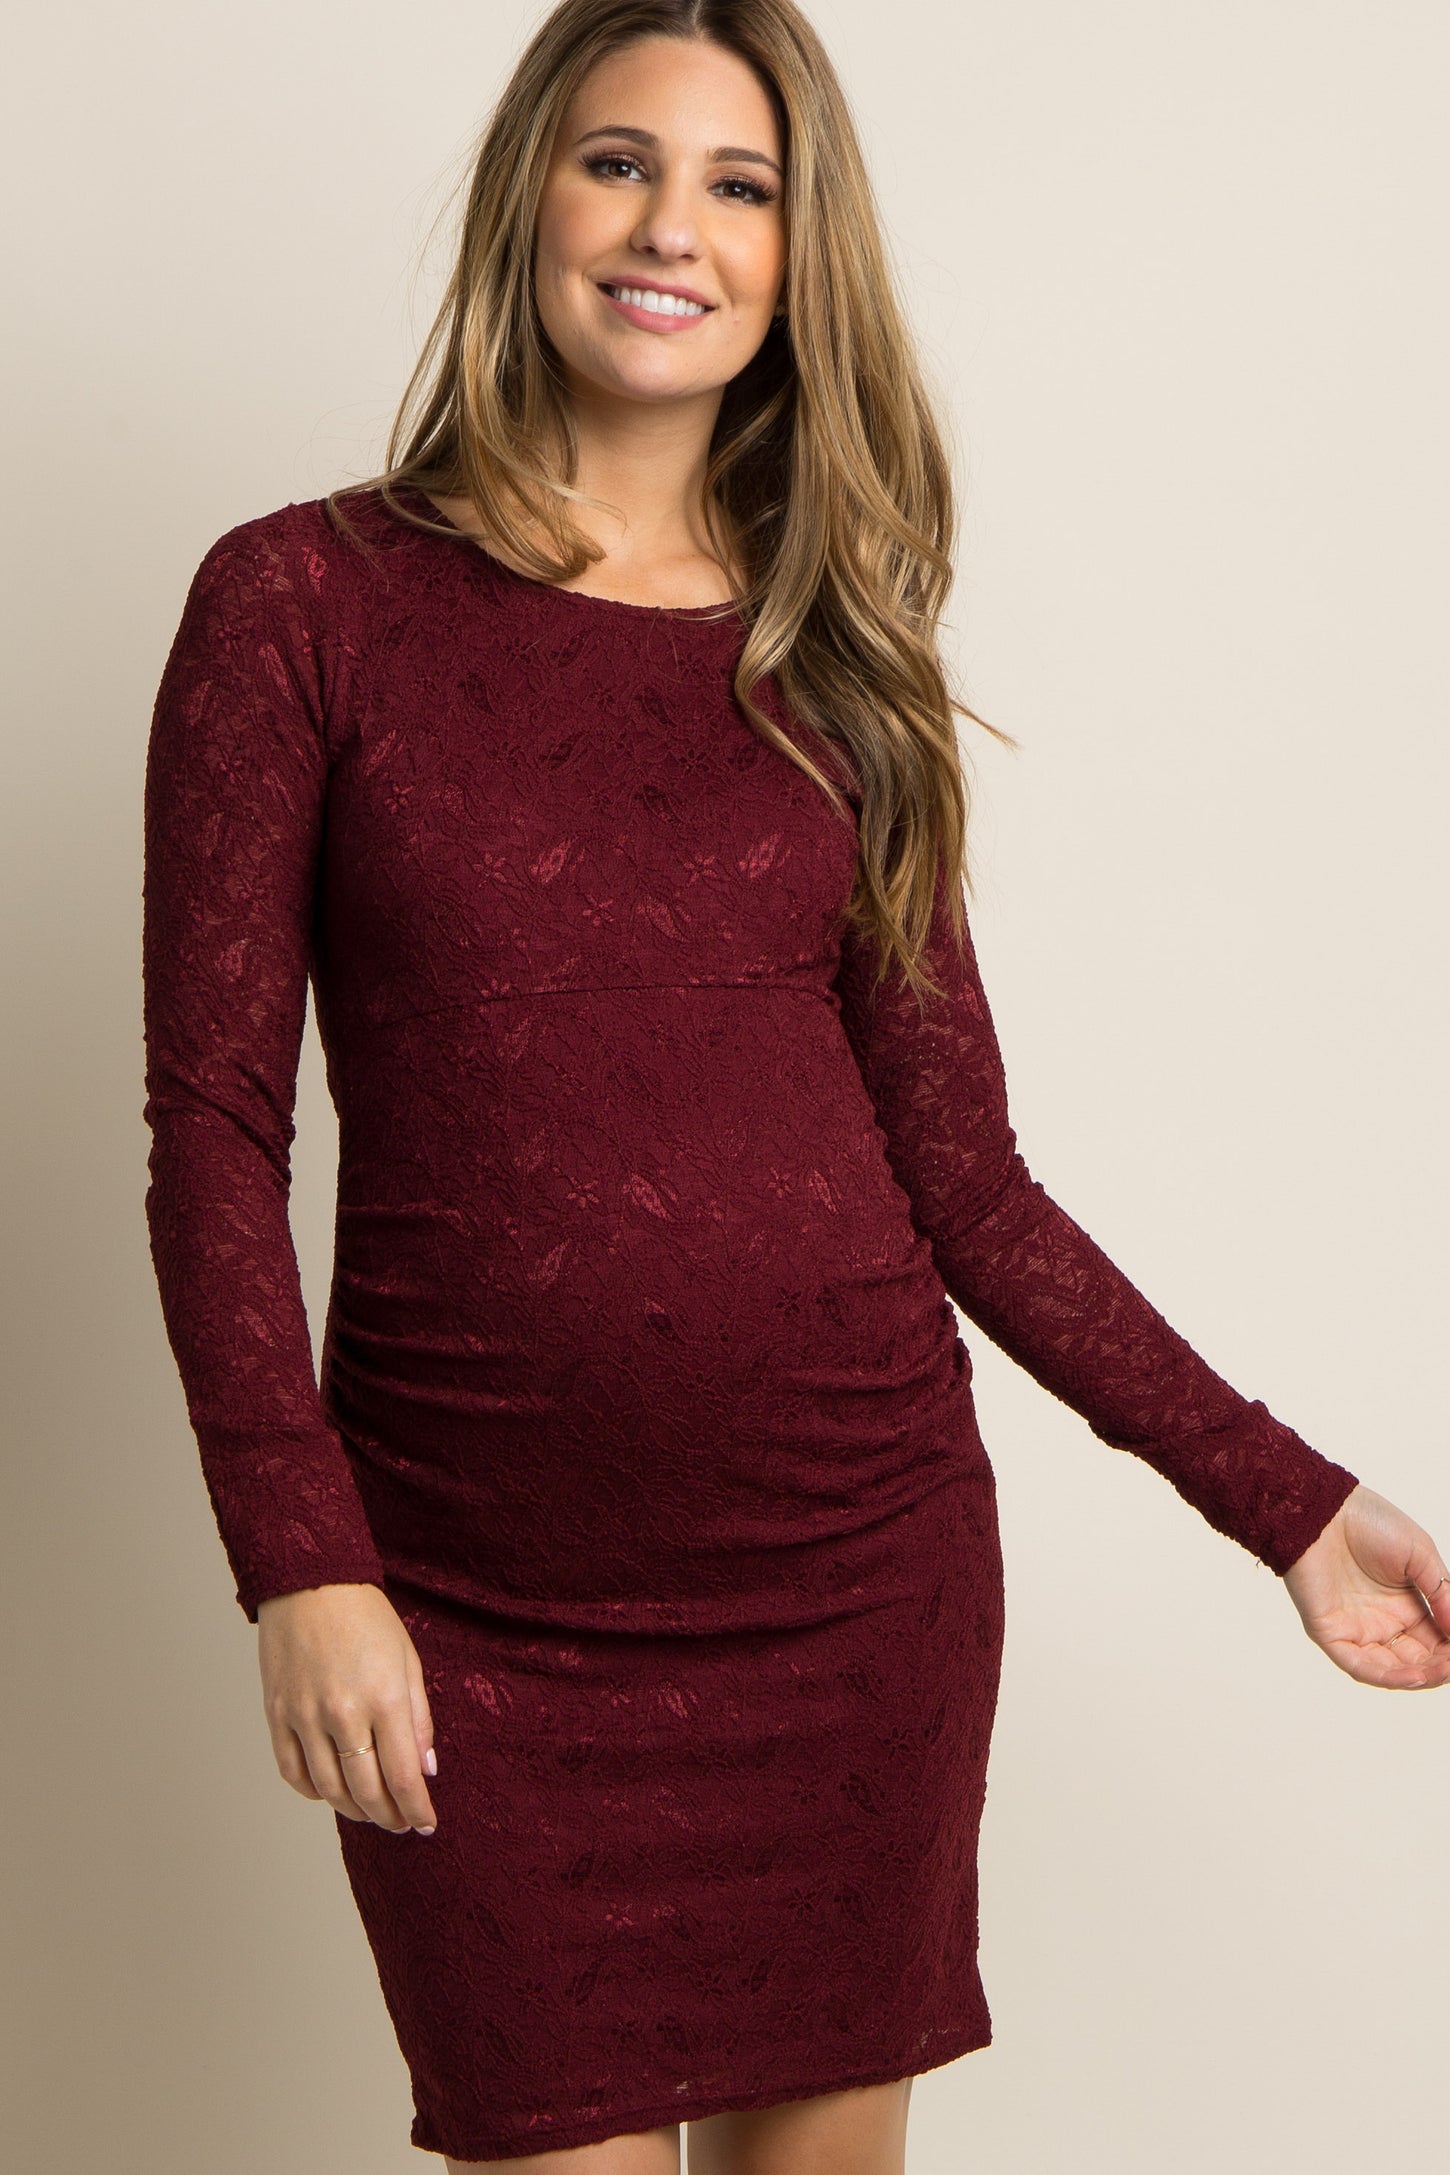 PinkBlush Burgundy Lace Fitted Long Sleeve Maternity Dress